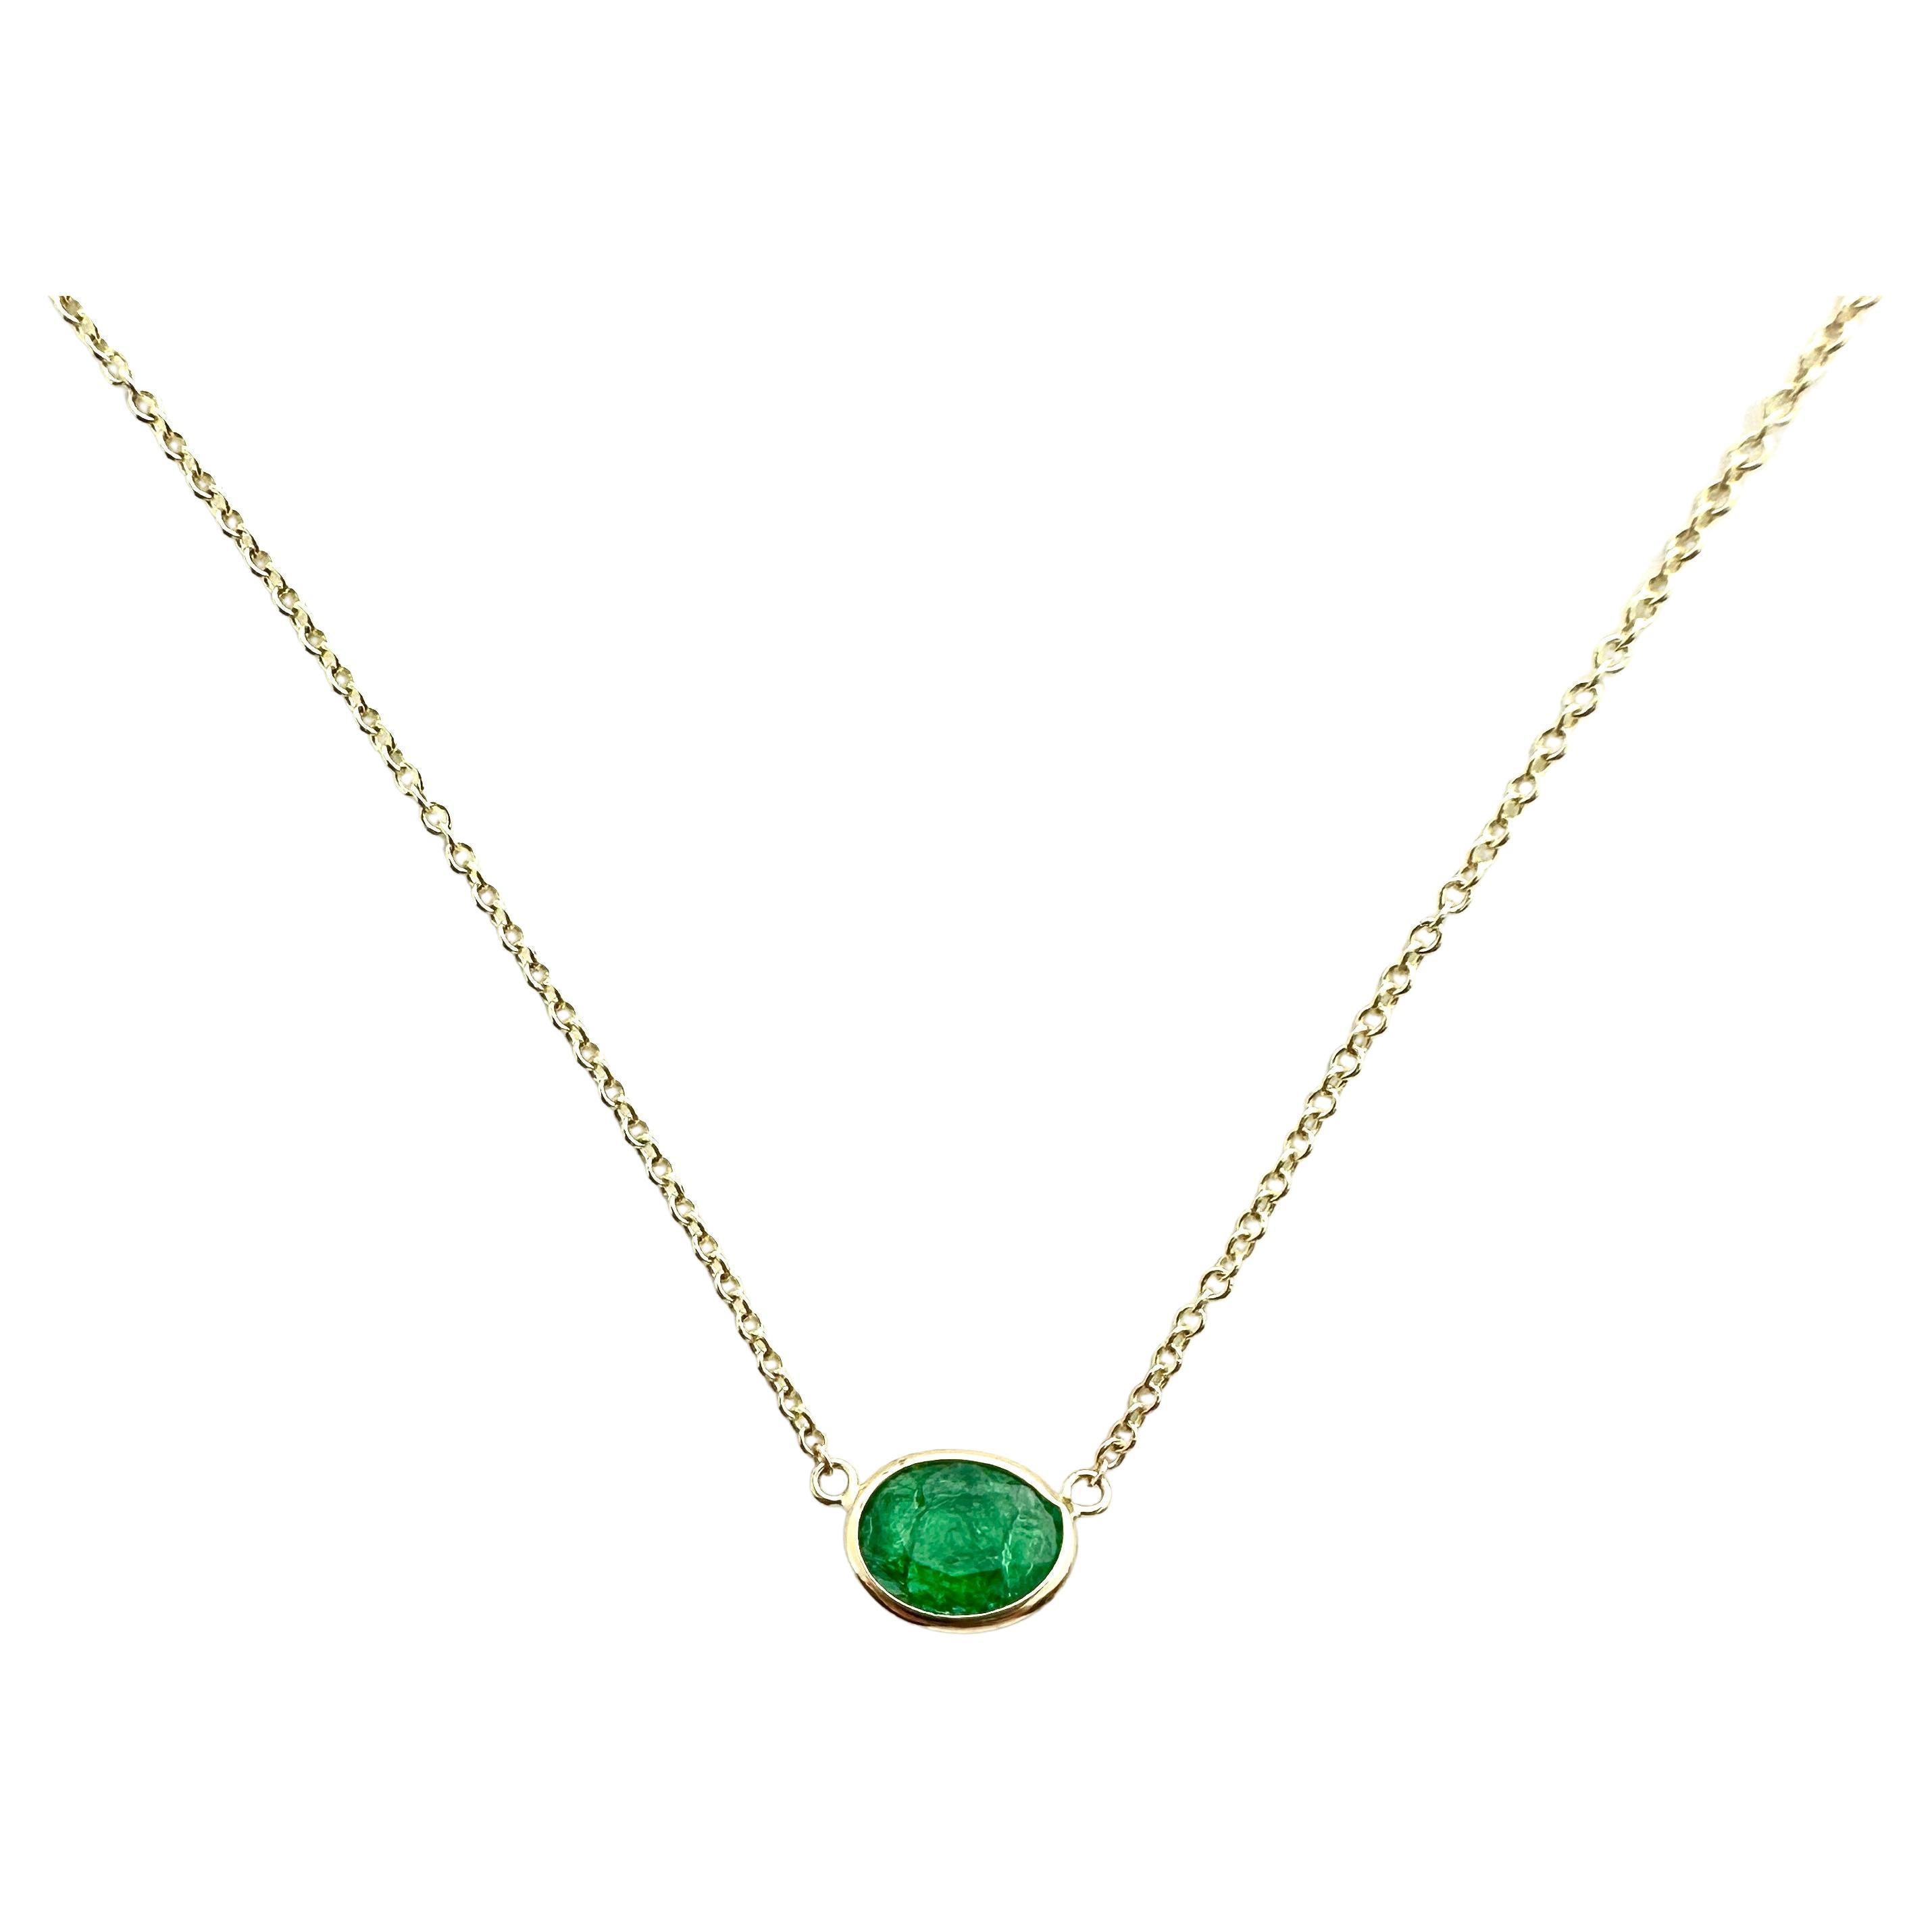 1.32 Carat Emerald Oval IGITL Certified & Fashion Necklaces In 14K Yellow Gold